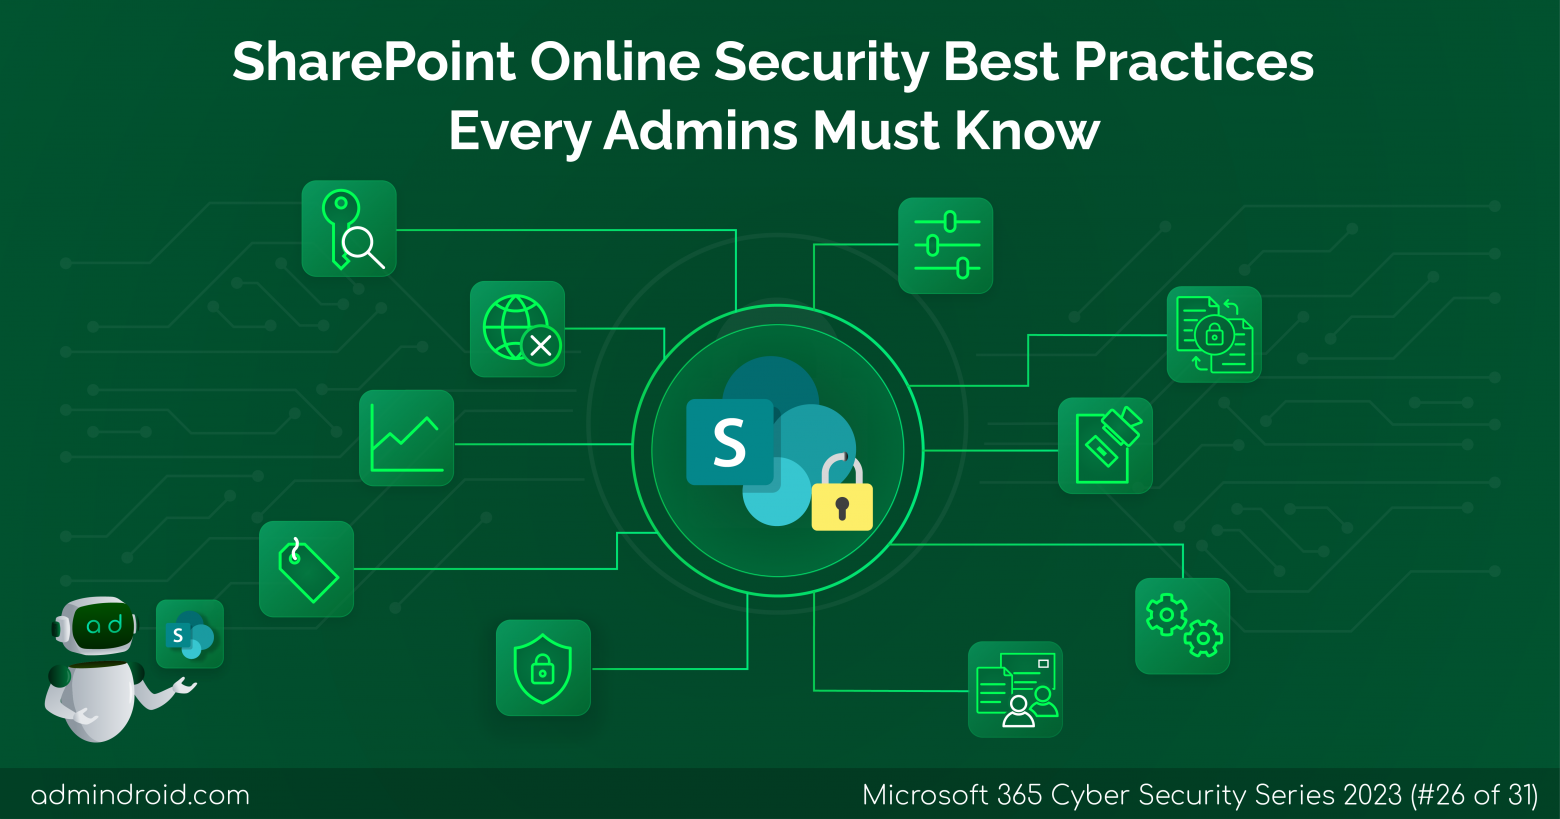 SharePoint Online Security Best Practices